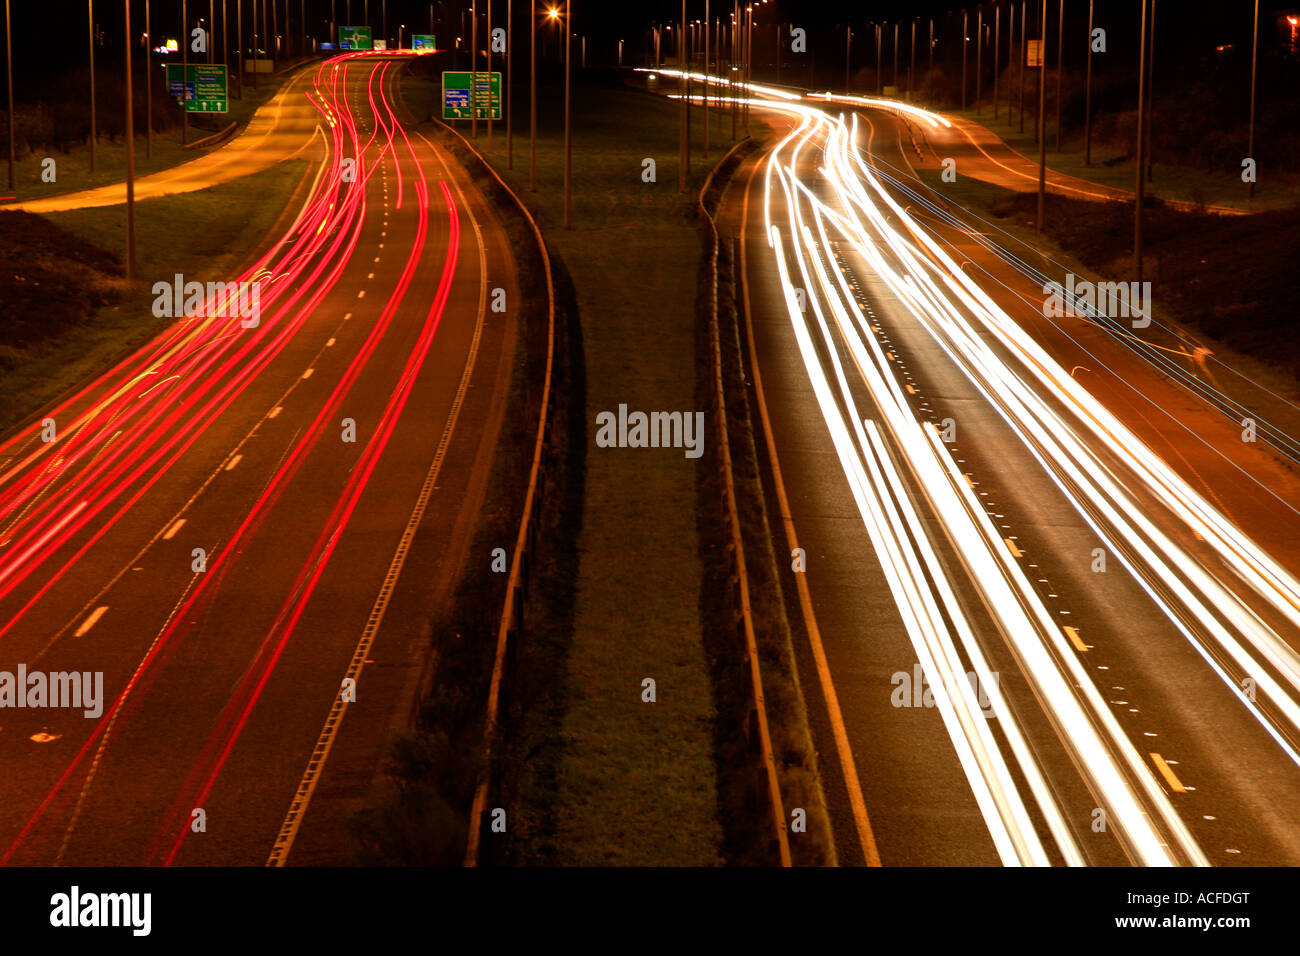 Speeding light trails from traffic on a busy road at night, generic roads, motorway Stock Photo